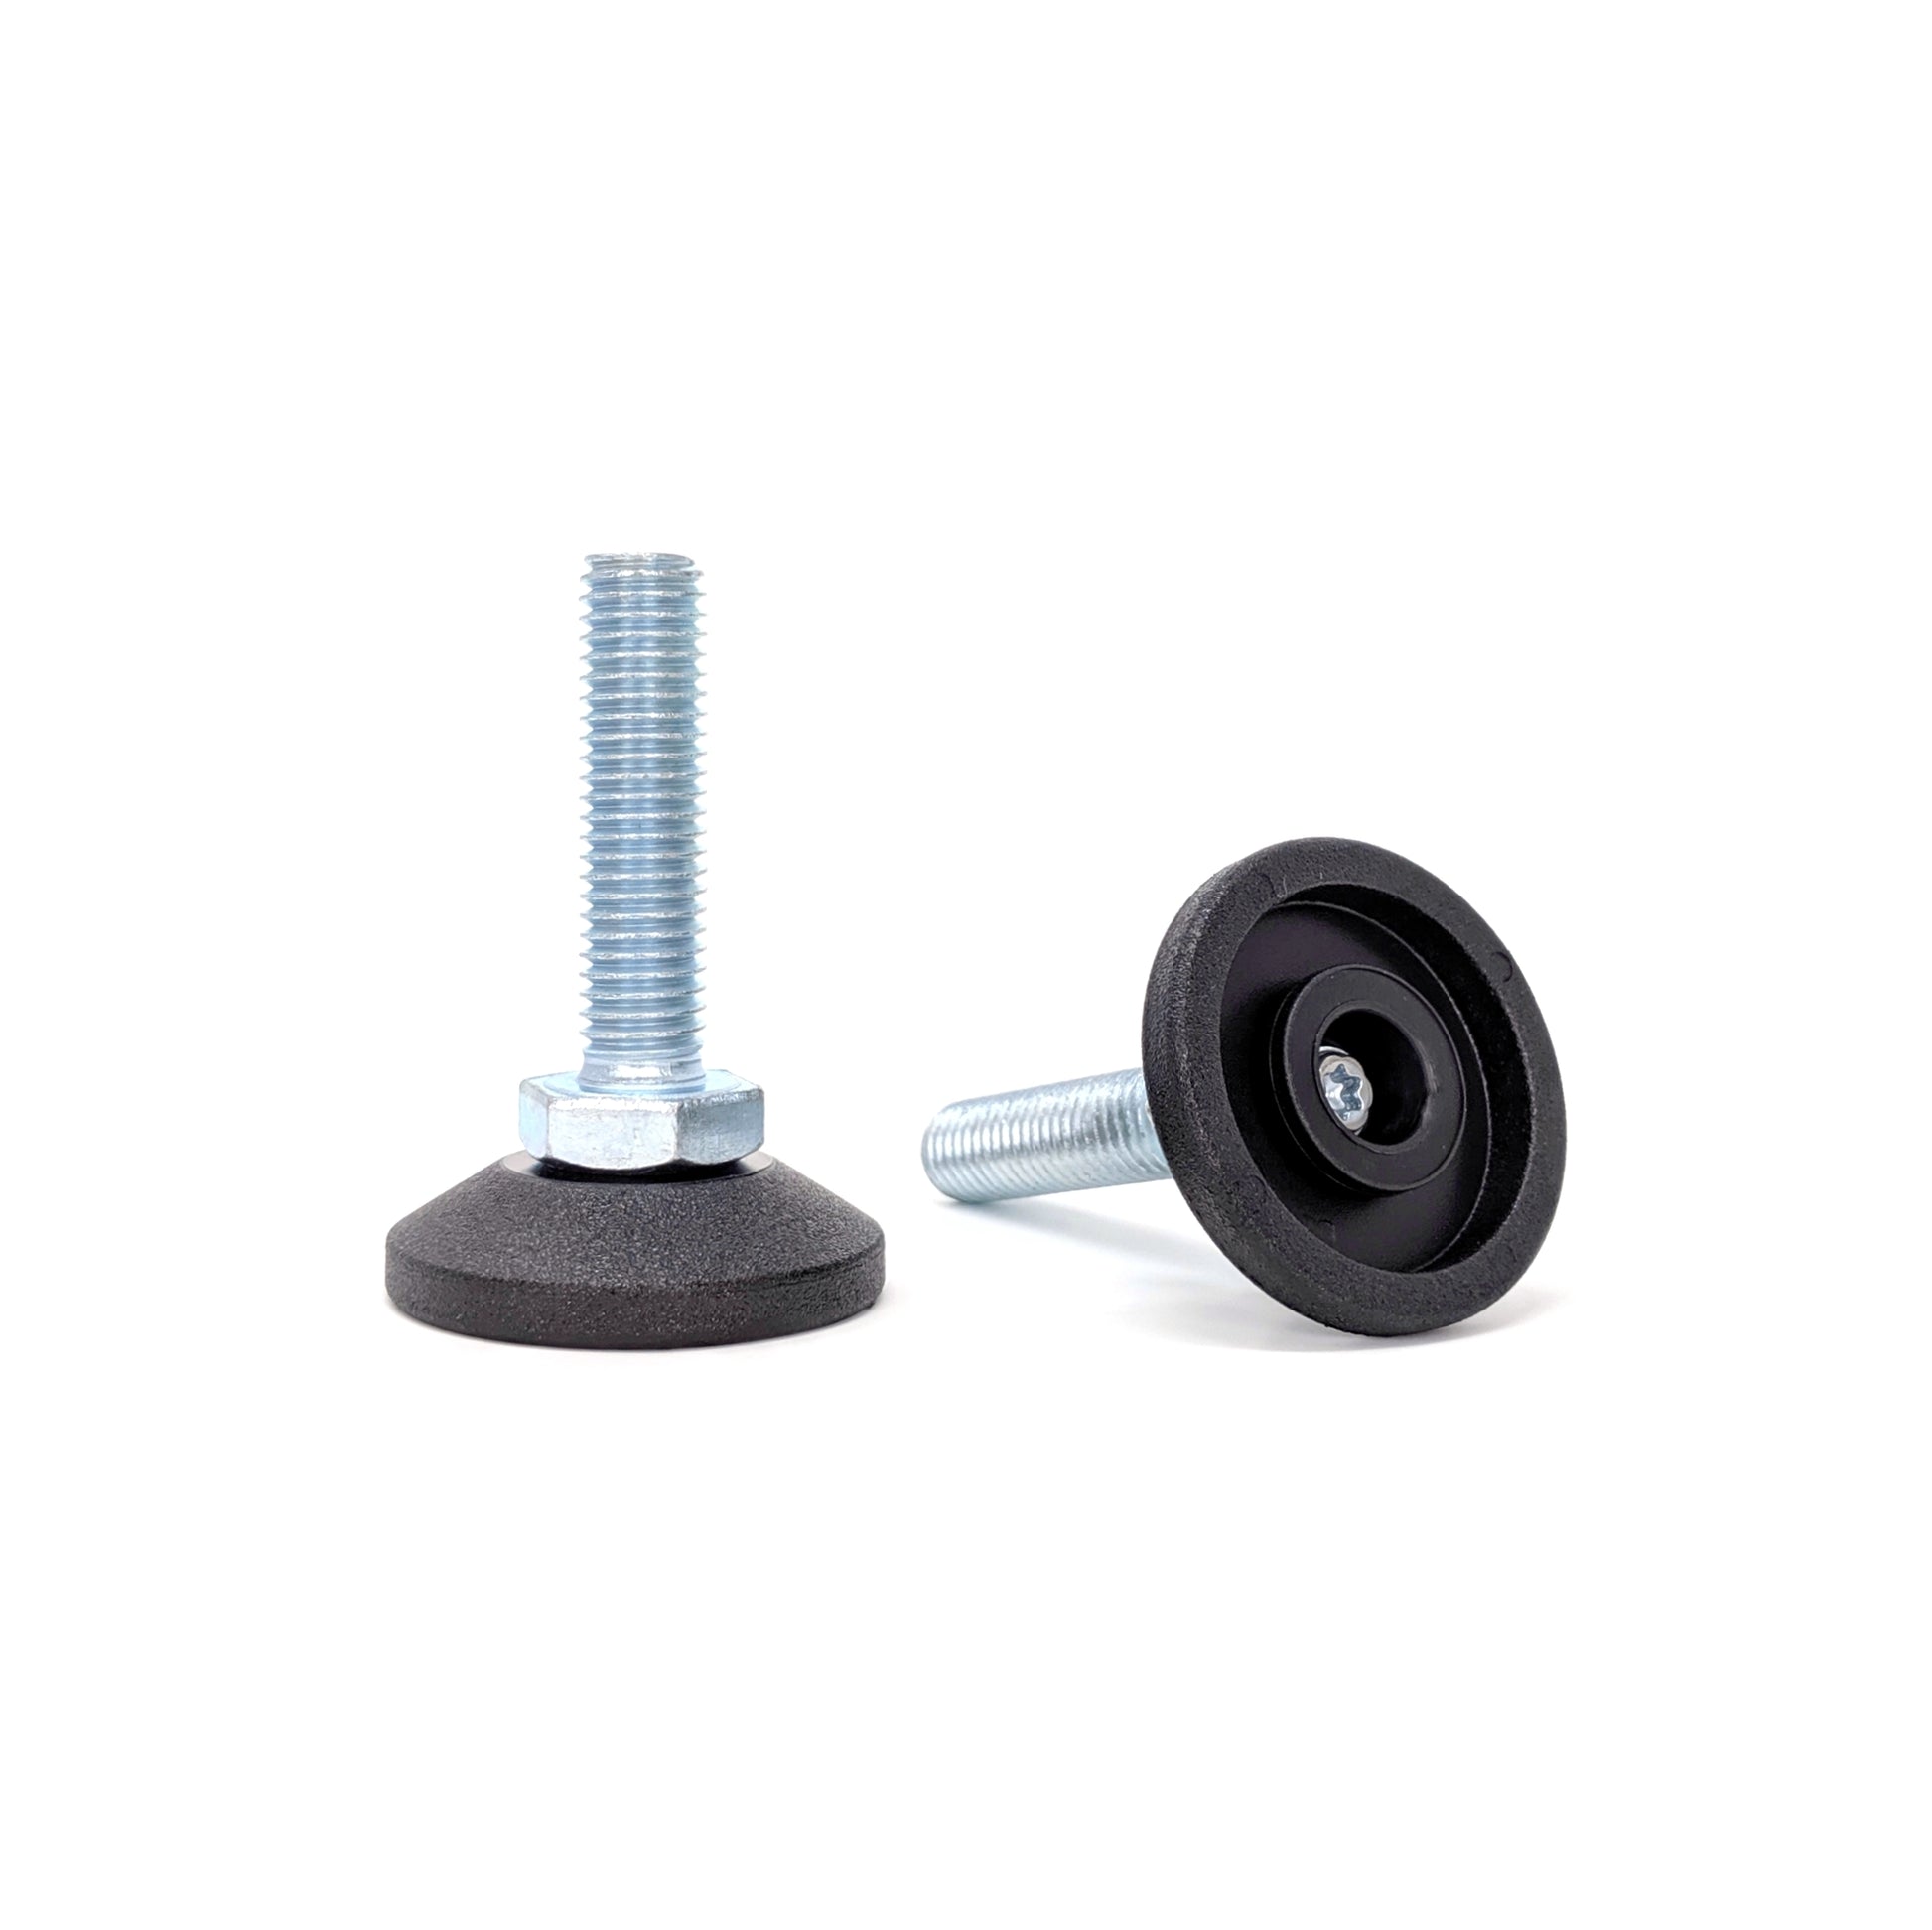 Adjustable Feet, 38mm Dia. Base, M10 40mm Thread, 550kg Static Load Capacity - Made In Germany - Keay Vital Parts